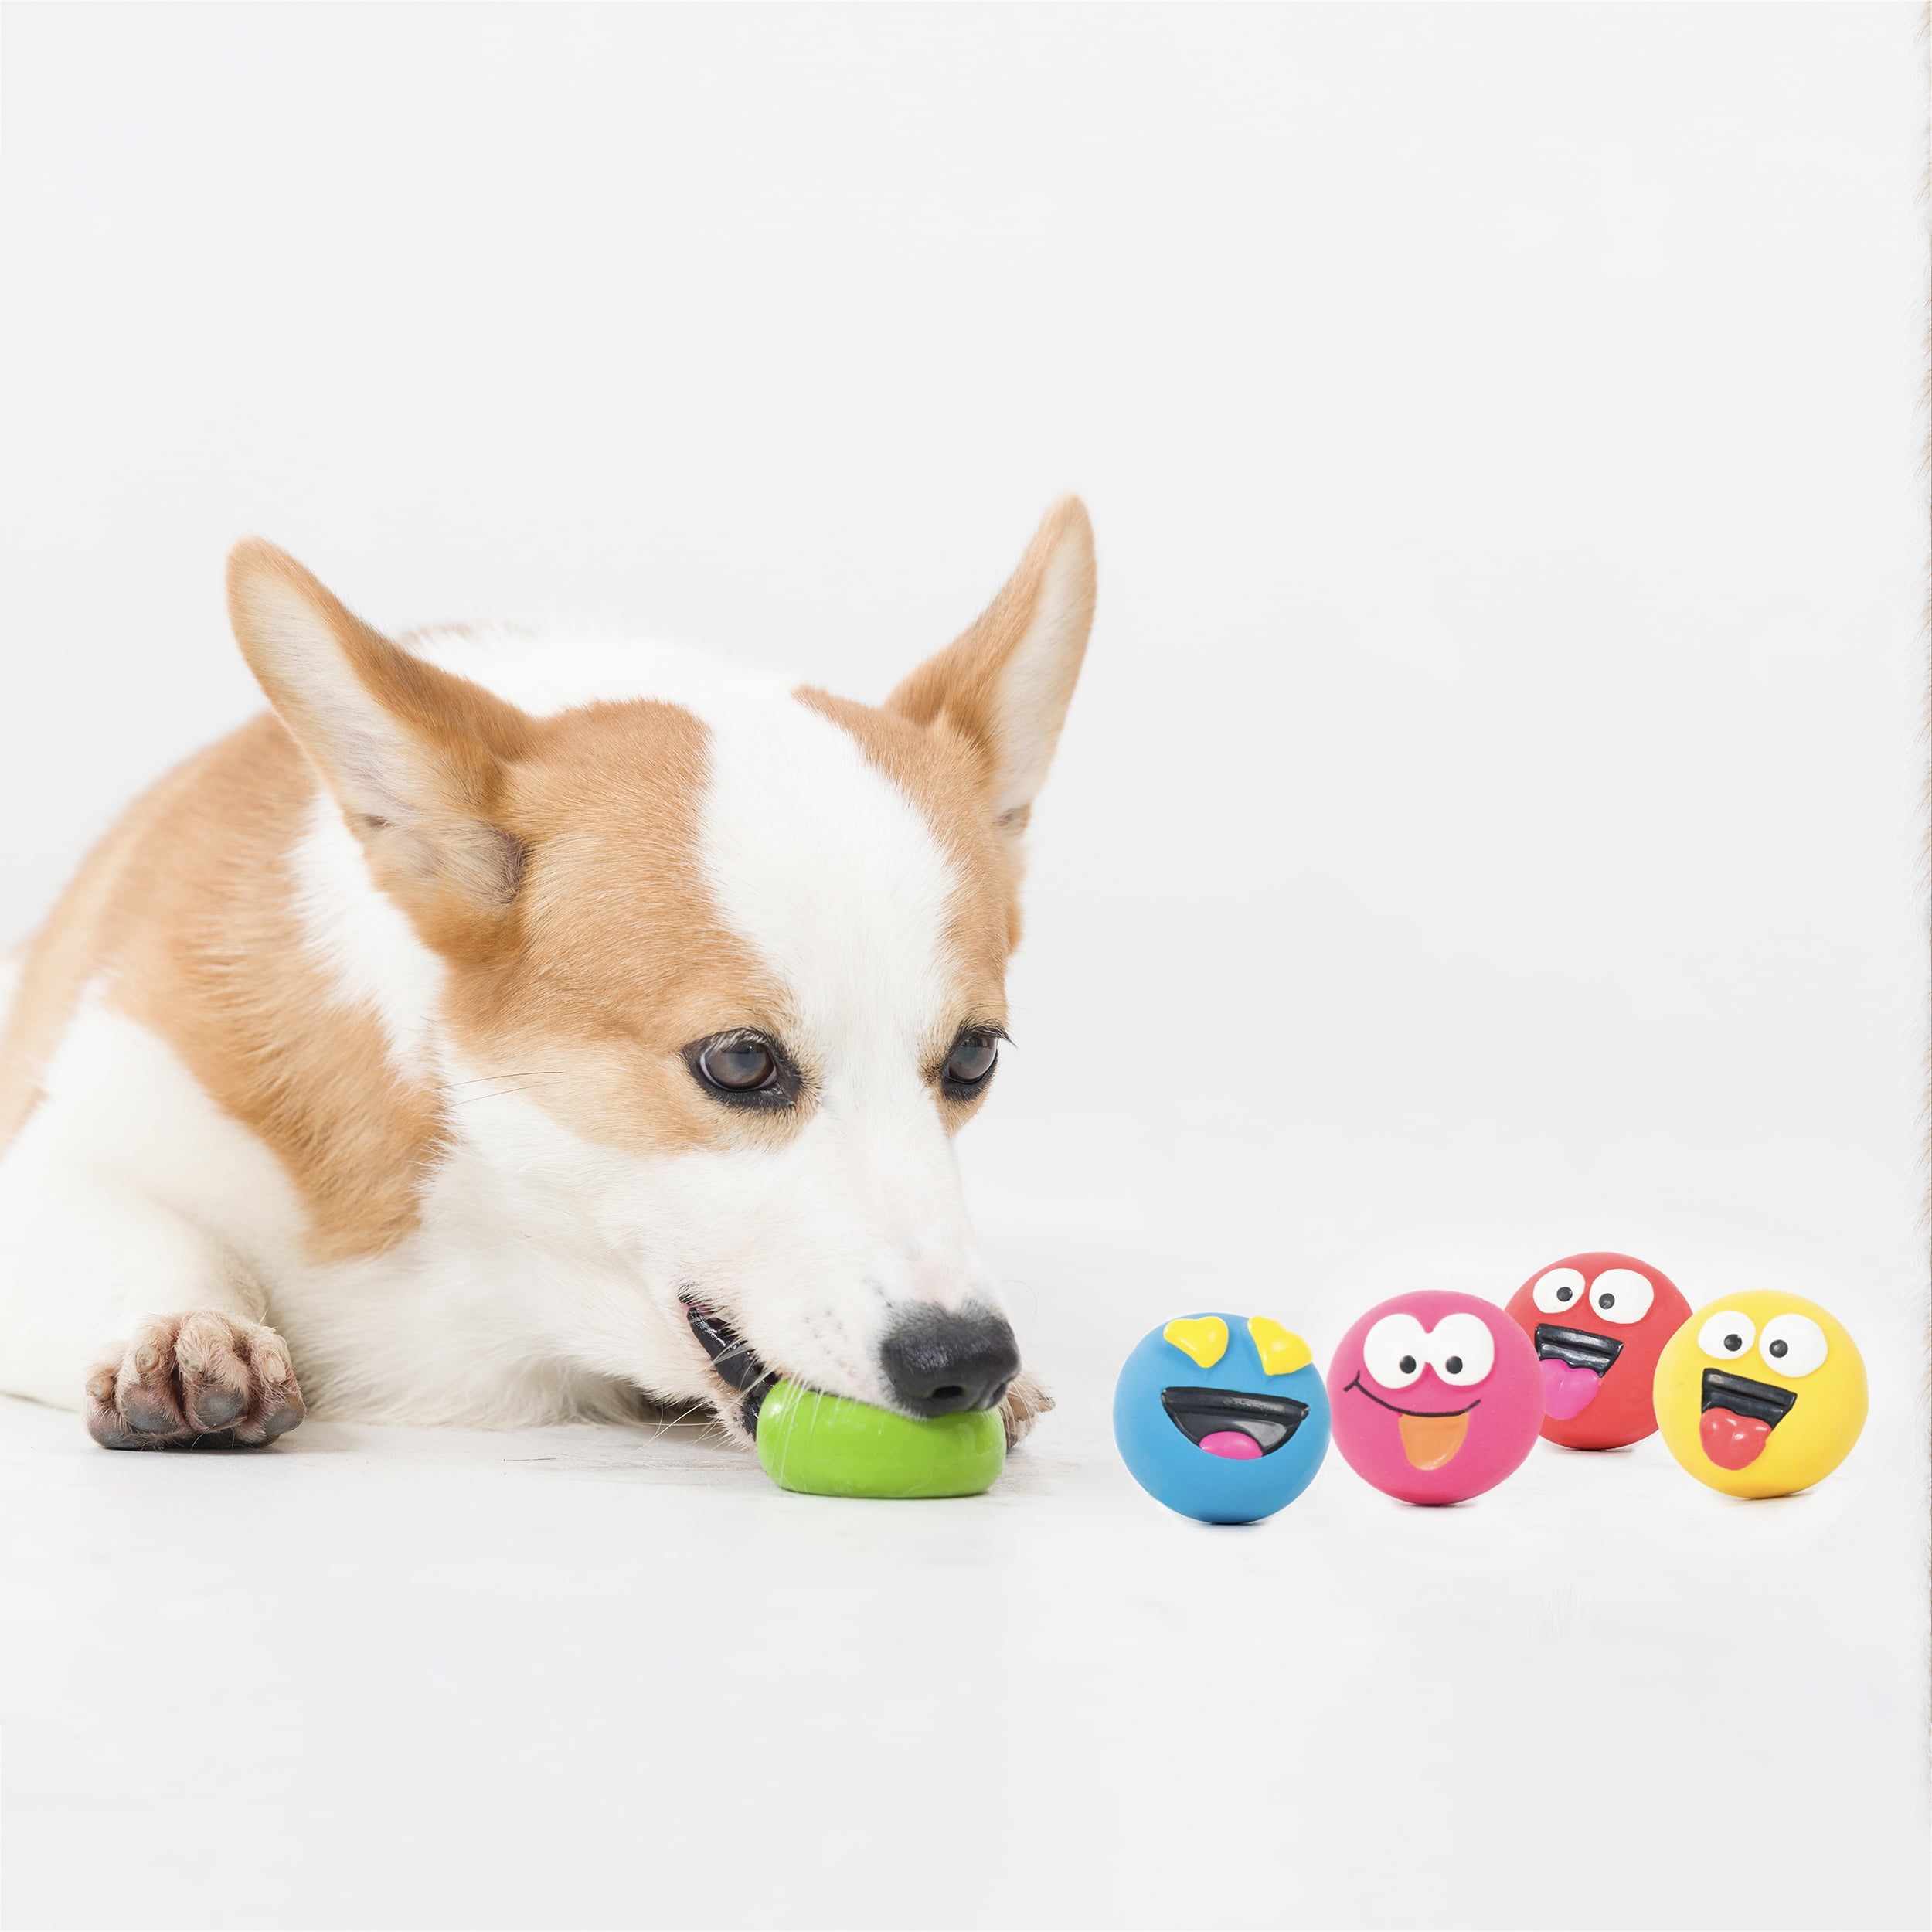 3 Count Vibrant Life Playful Buddy Emoticon Durable Rubber Latex Dog Chew Toy with Audible Squeaky Sound Medium 